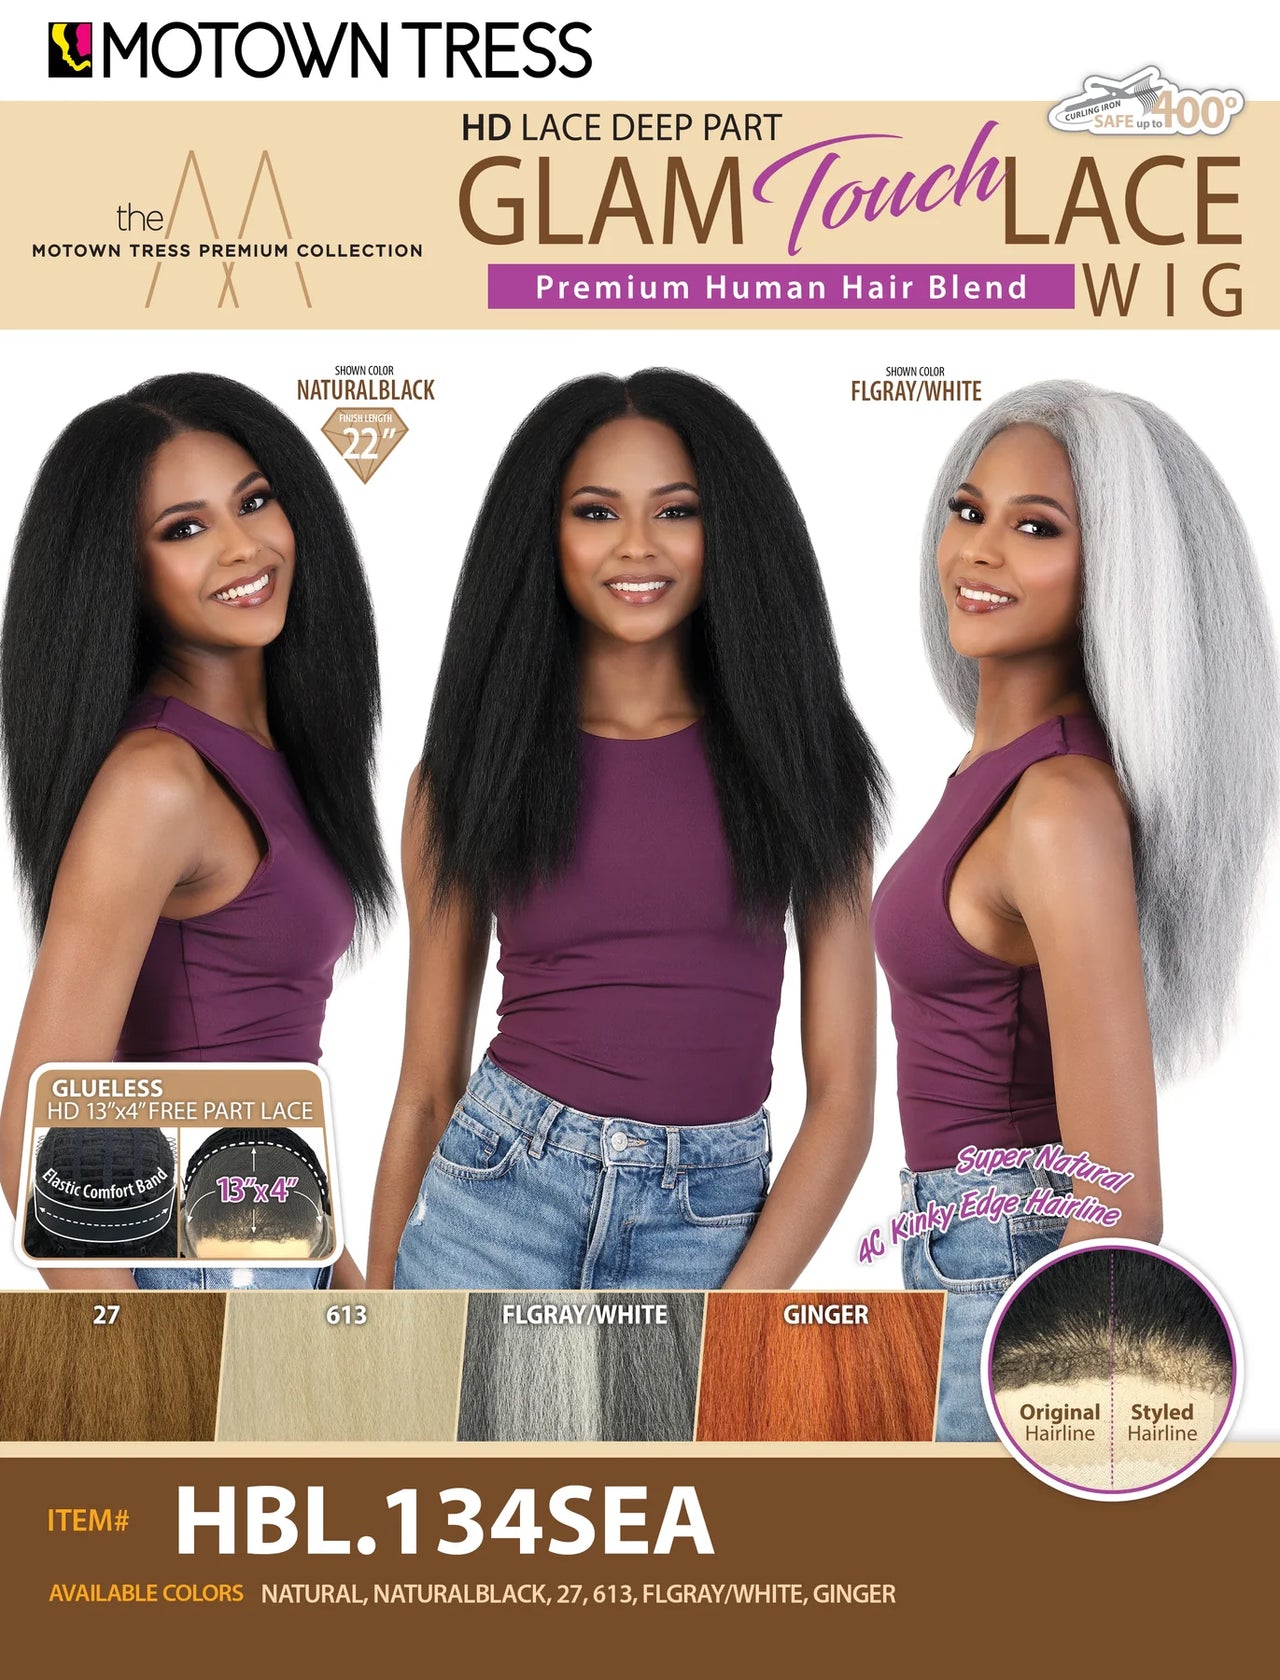 Motown Tress HD Lace Deep Part Glam Touch Lace Wig - HBL.134SEA - Elevate Styles